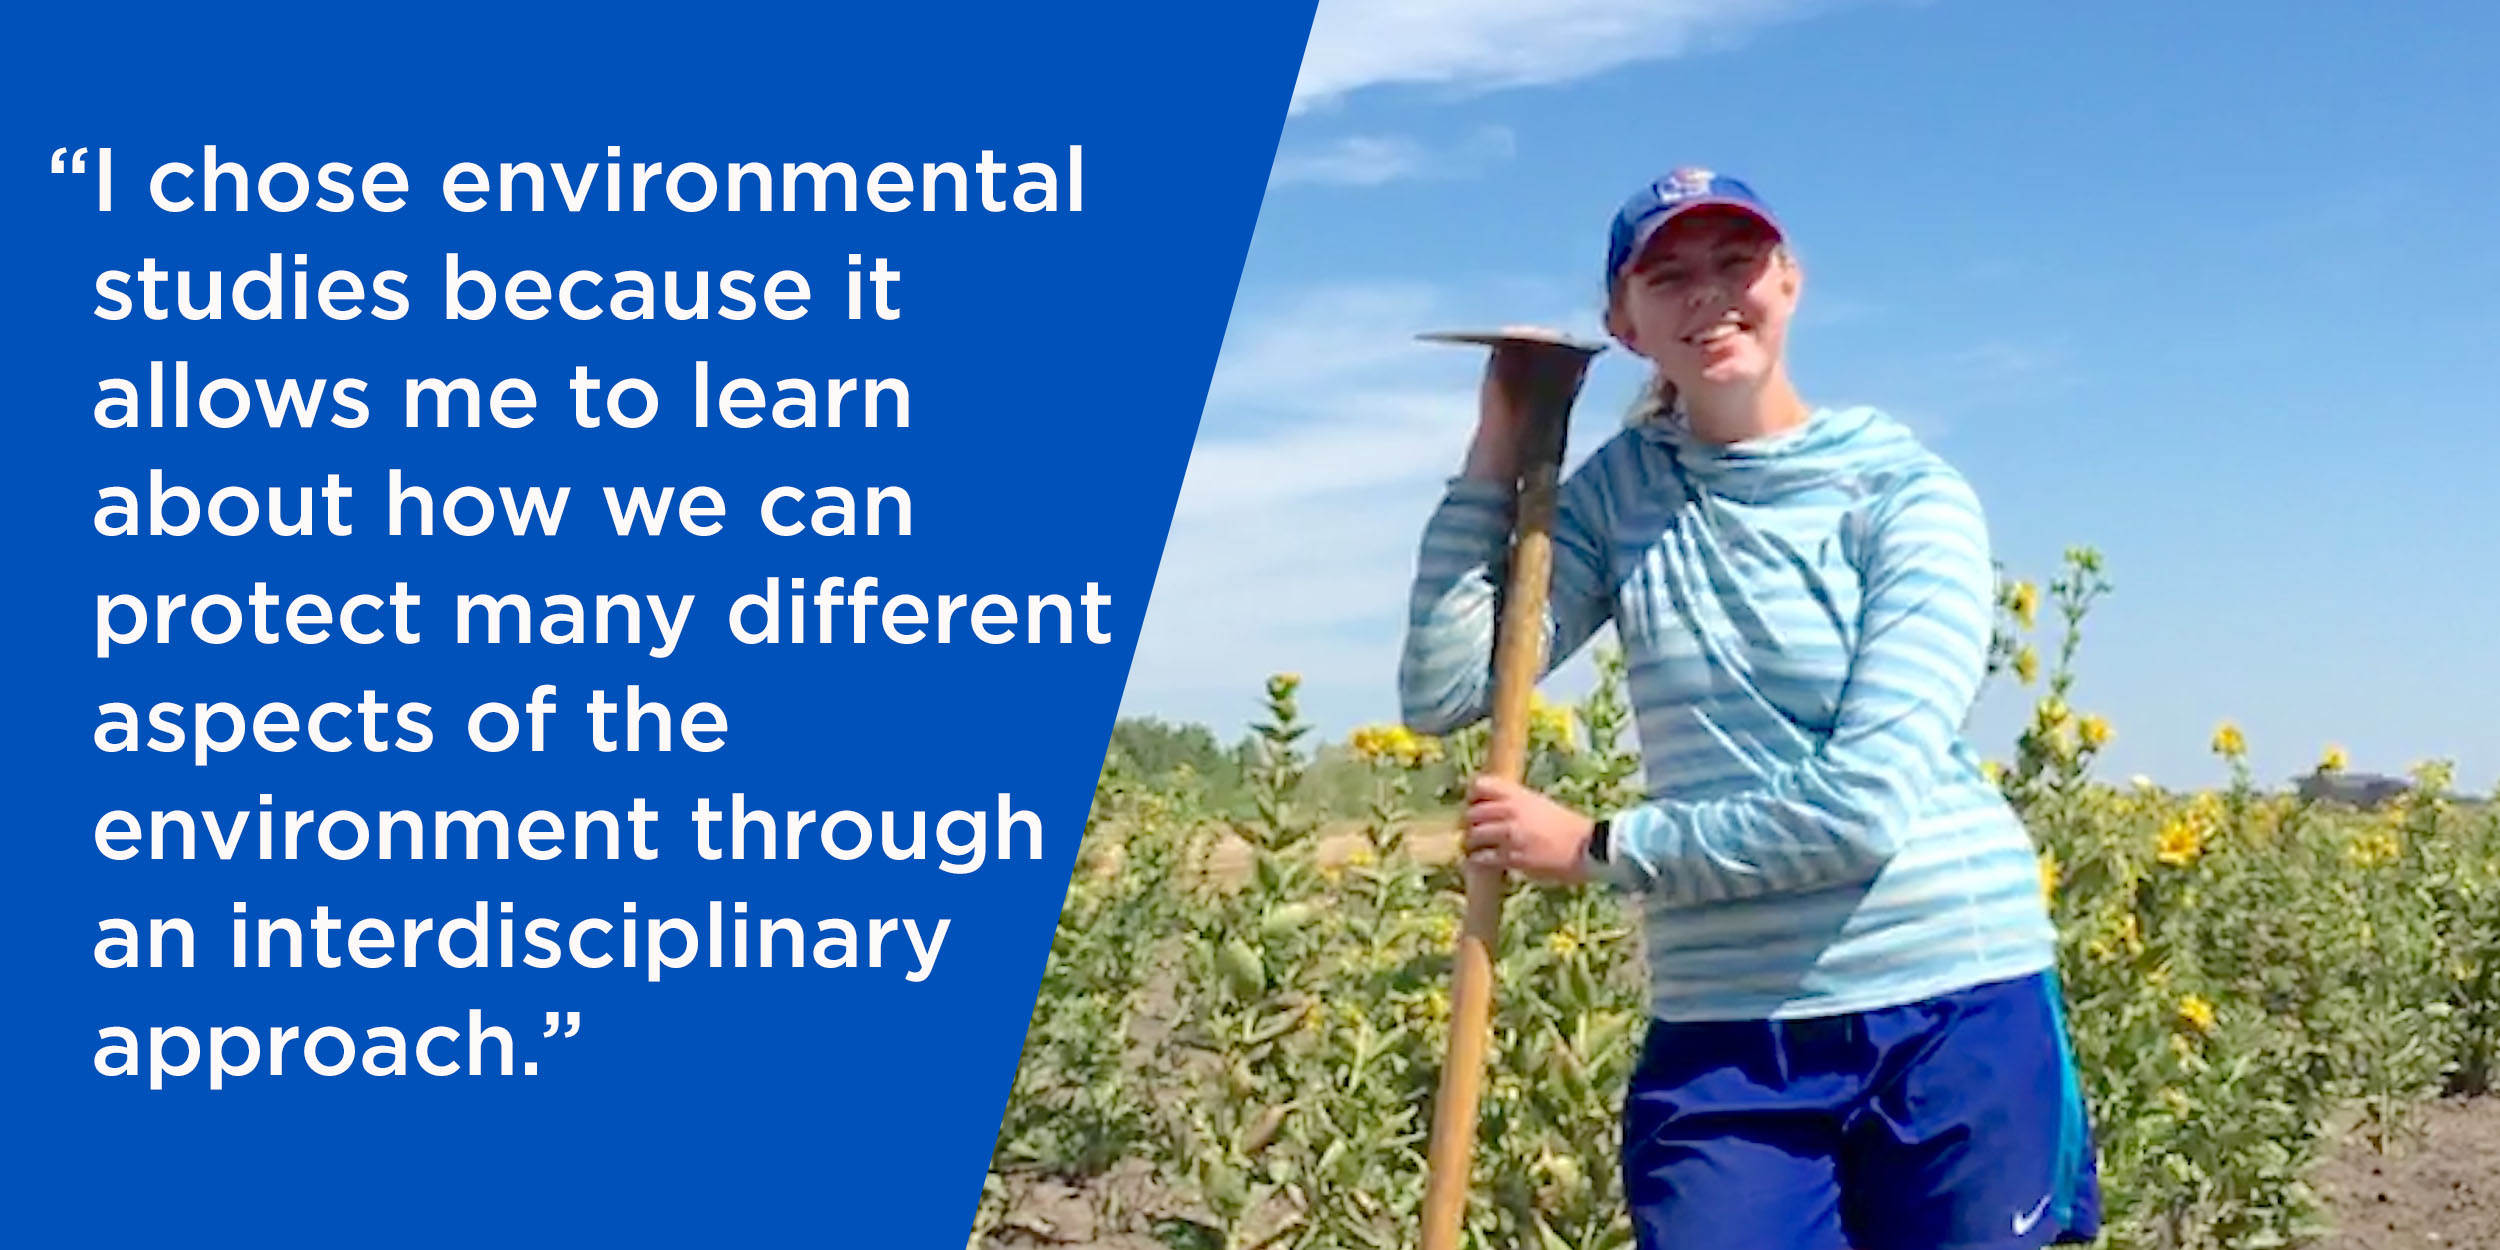 “I chose environmental studies because it allows me to learn about how we can protect many different aspects of the environment through an interdisciplinary approach.”